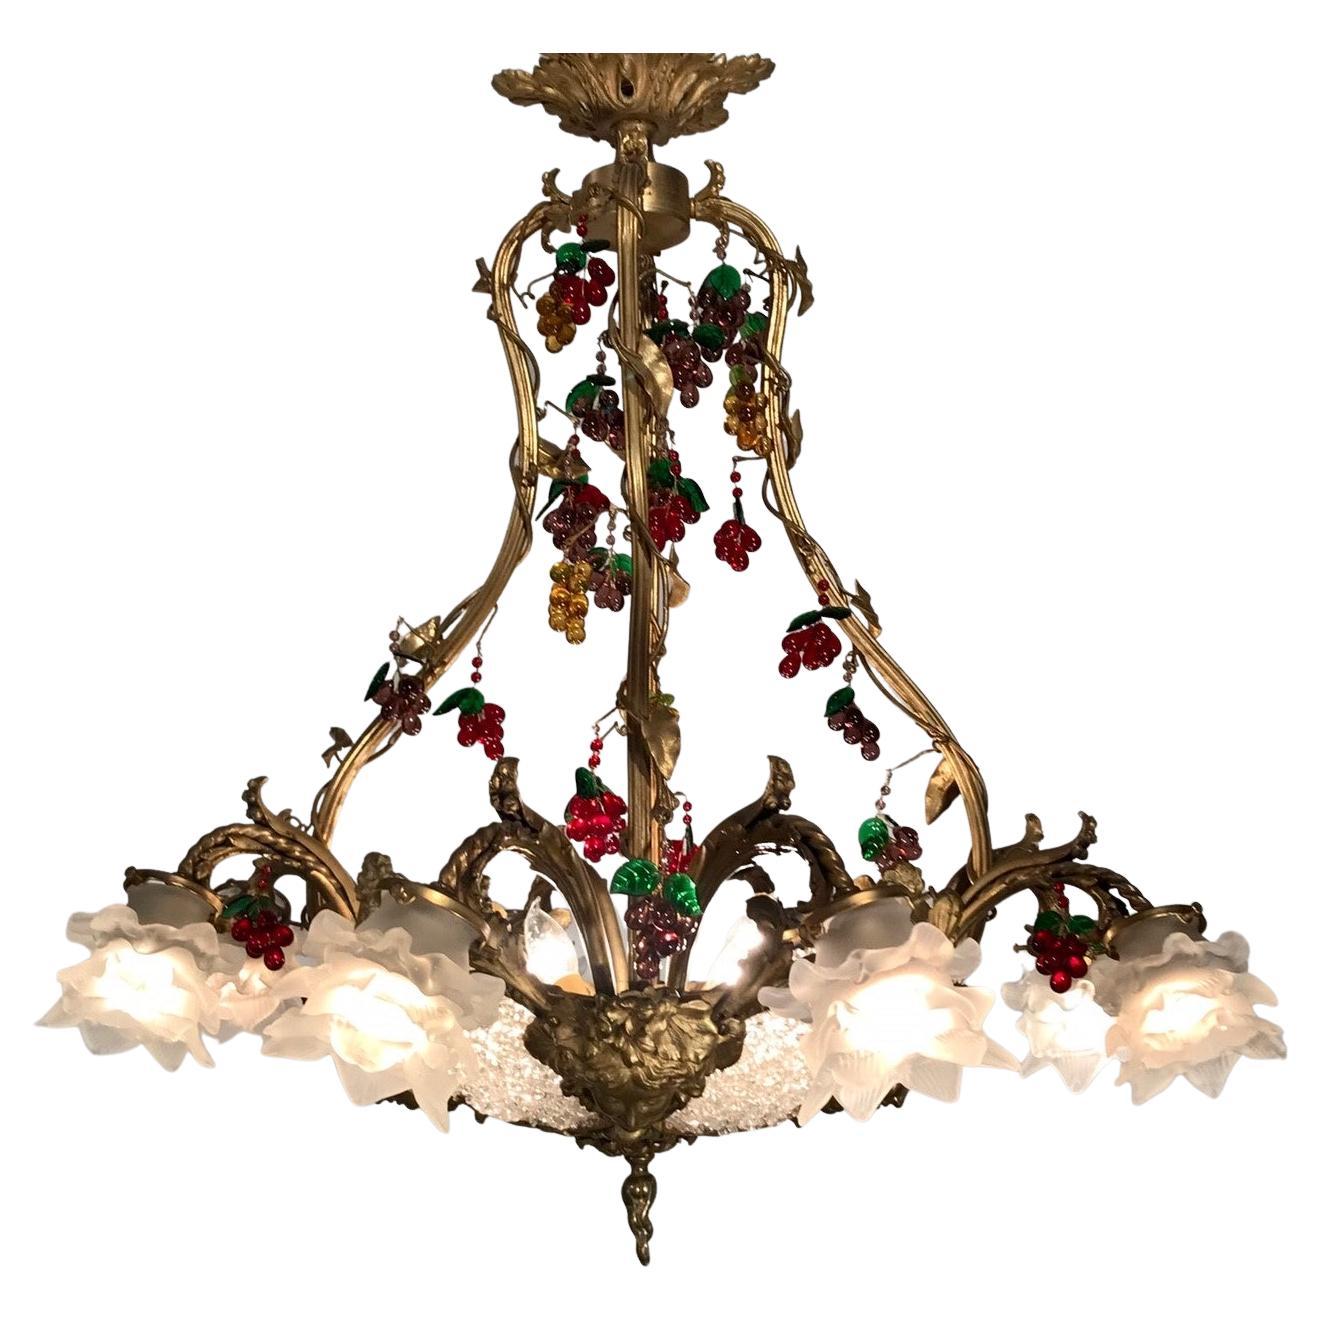 A Belle Epoque Eight Arm Chandelier Modelled with Dionysis/Bacchus Masks 